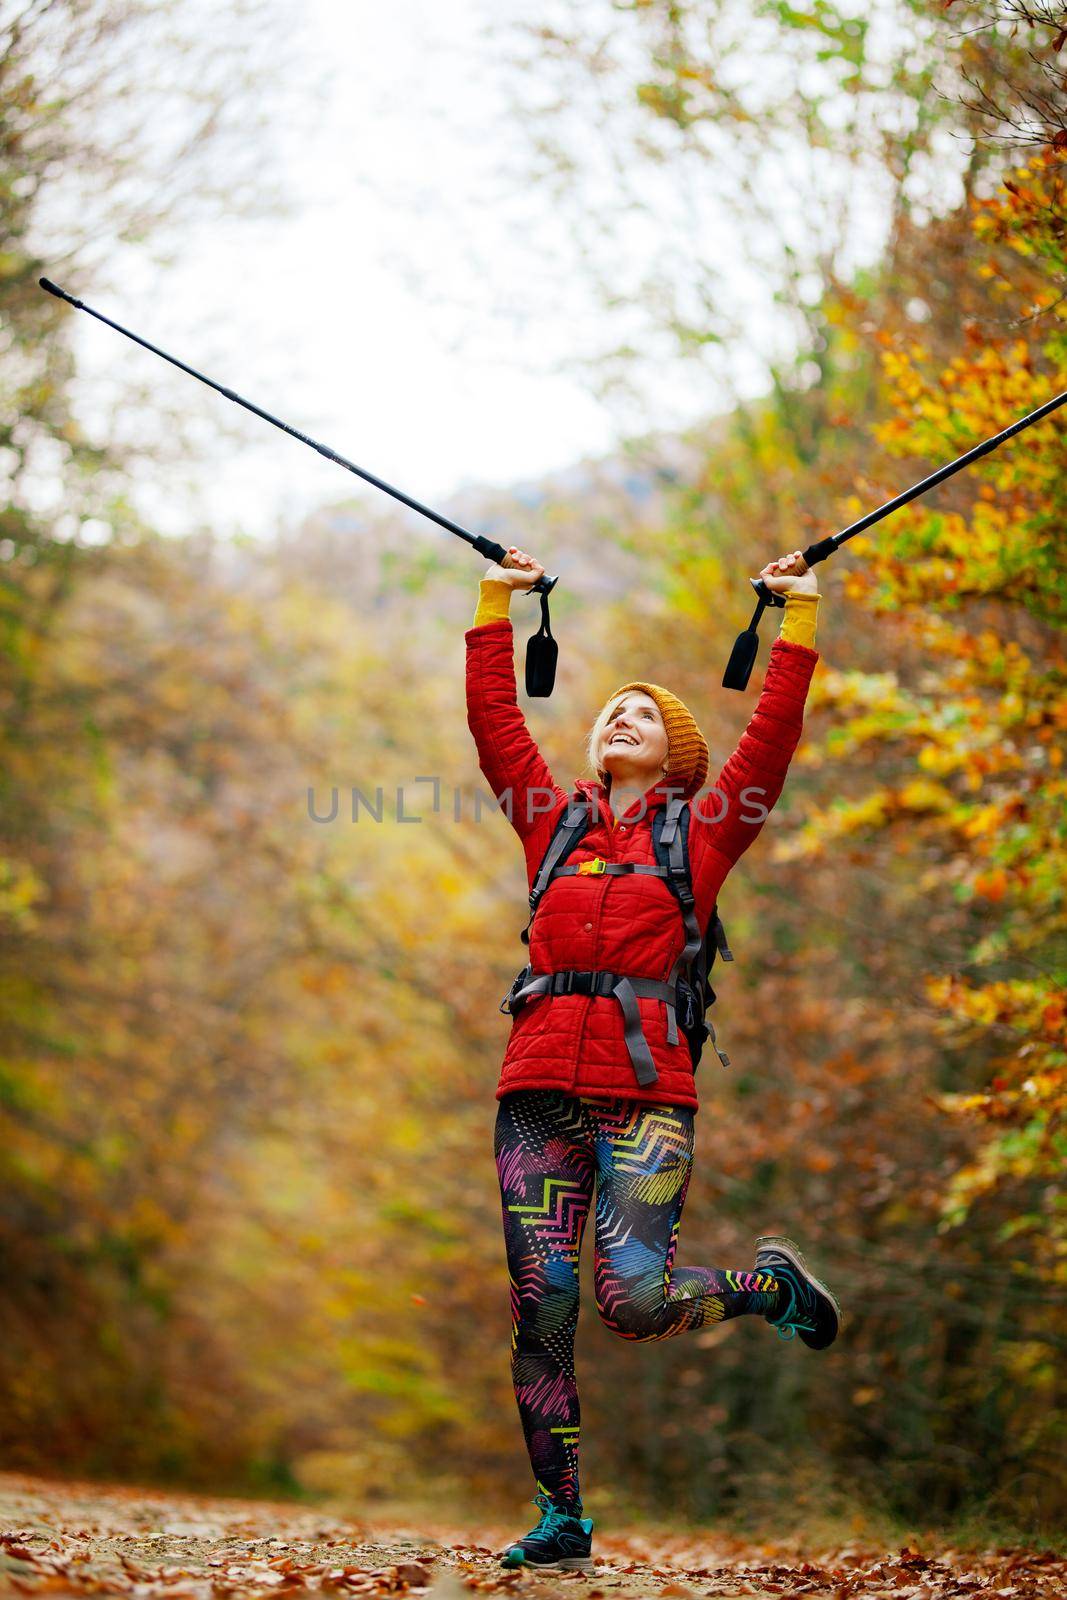 Hiking girl with poles and backpack on a trail. Hands up enjoying in nature. Travel and healthy lifestyle outdoors in fall season. by kokimk